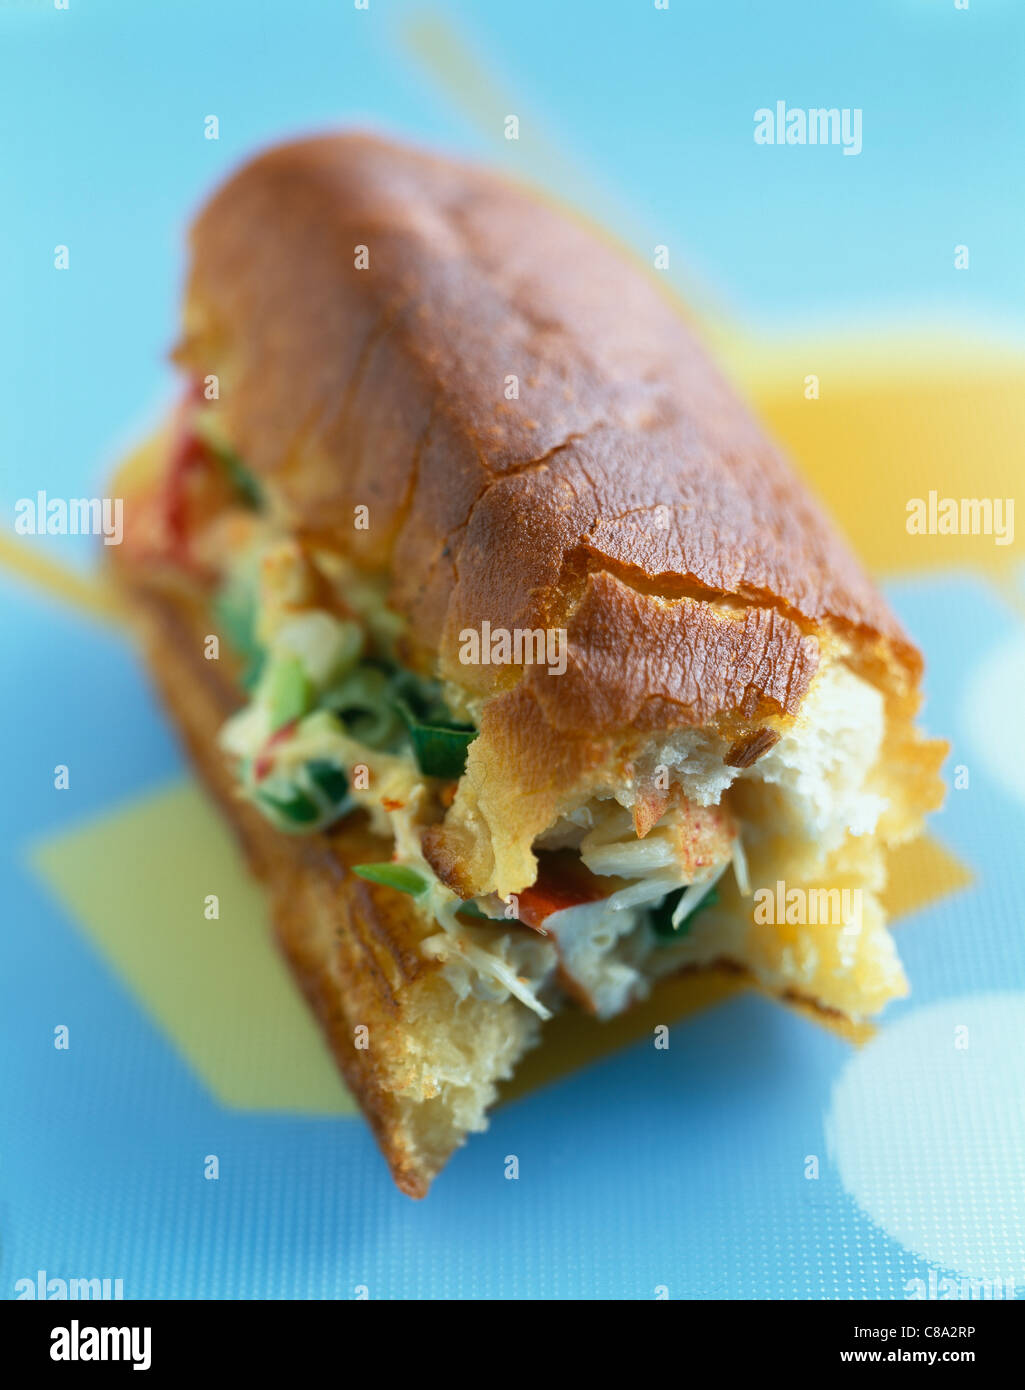 Chic lobster hot dog Stock Photo